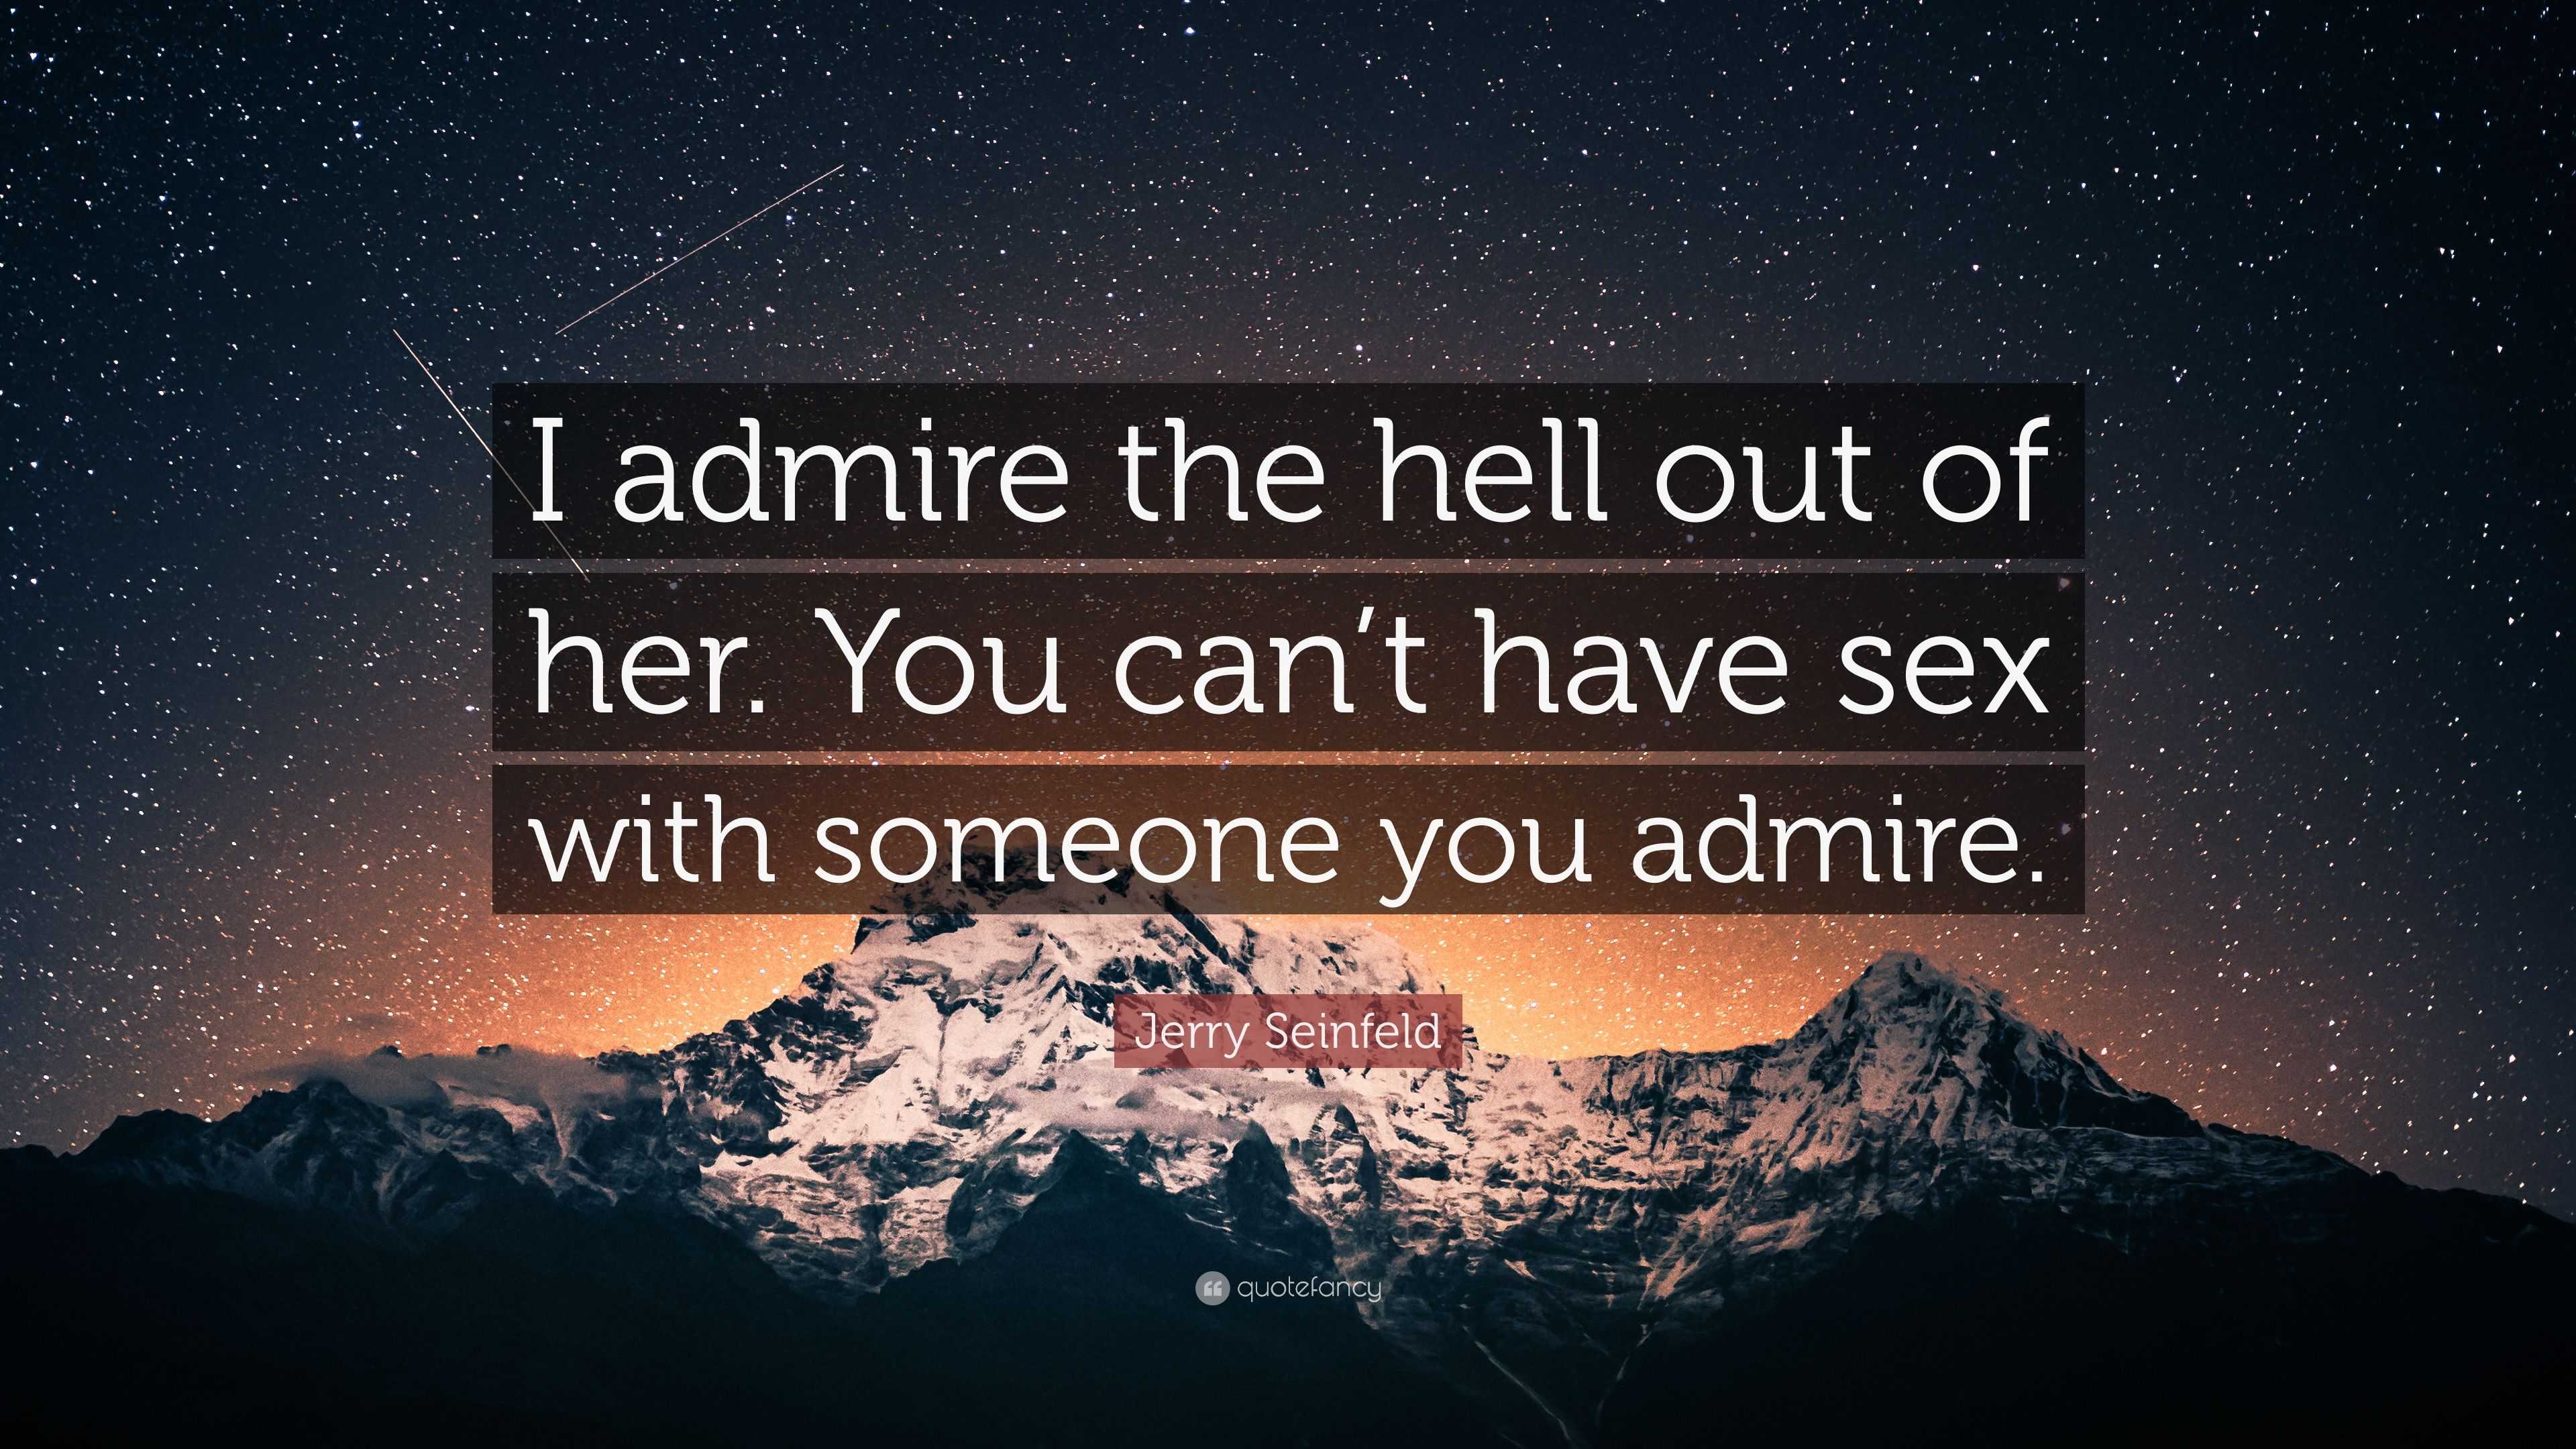 Jerry Seinfeld Quote “i Admire The Hell Out Of Her You Cant Have Sex With Someone You Admire” 